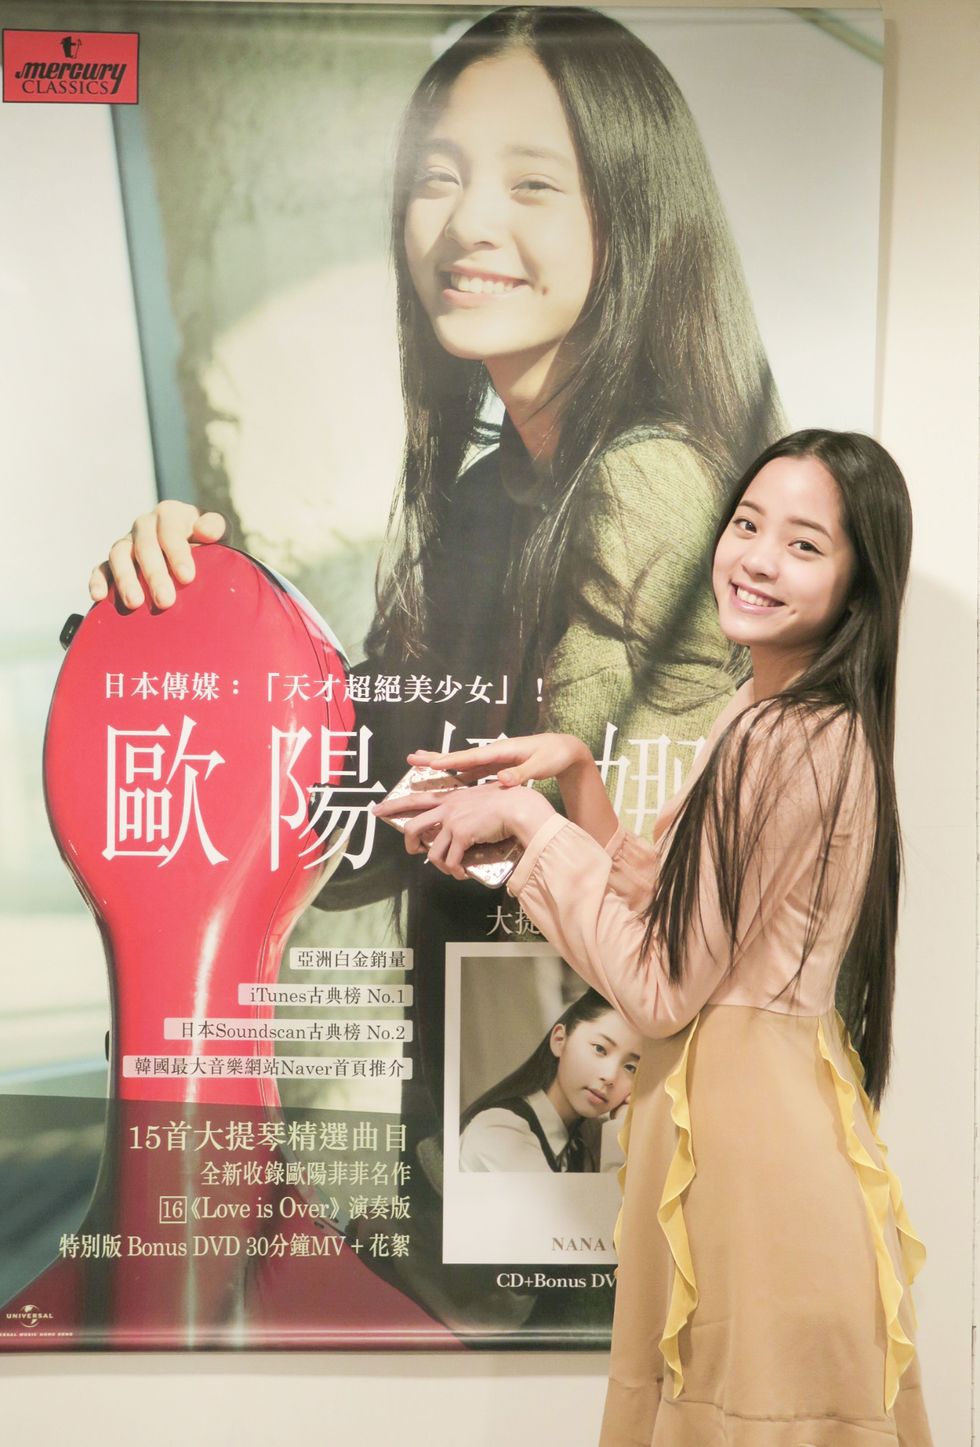 Smile, String instrument accessory, Youth, Guitar accessory, Advertising, Long hair, Poster, Perfume, Makeover, Laugh, 